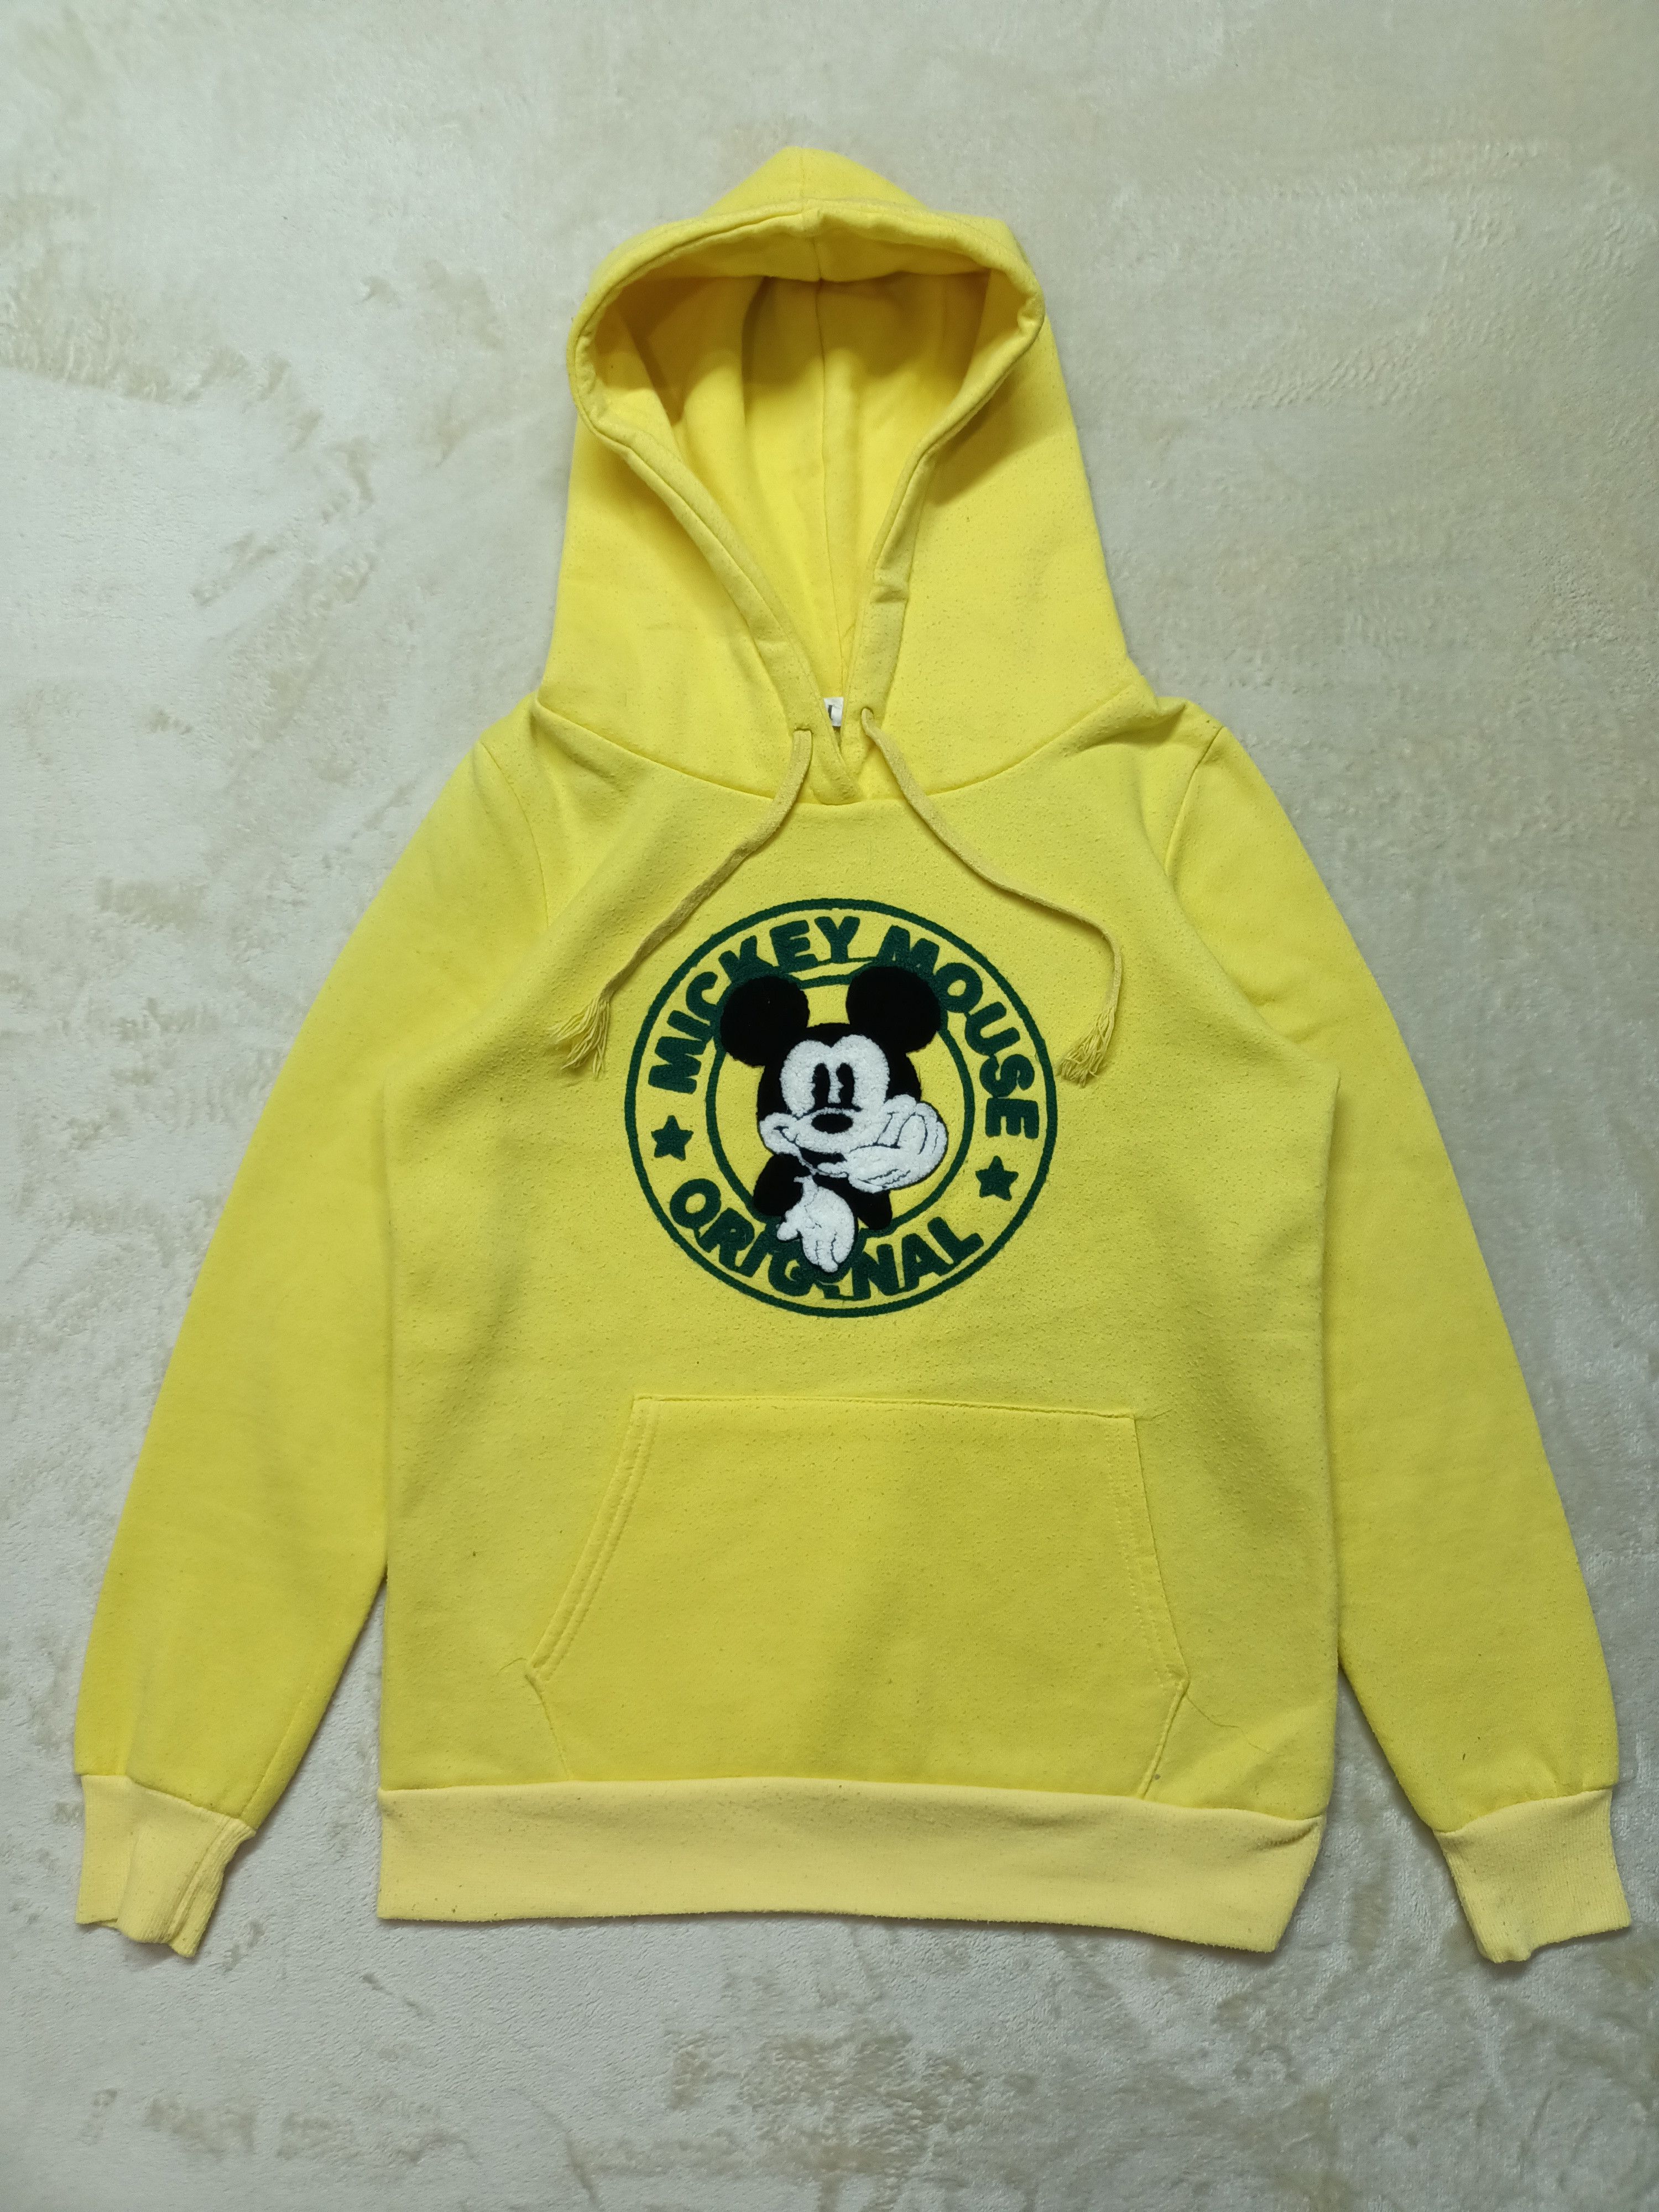 Archival Clothing - Mickey Mouse Original Embroidery Graphic Hoodie - 2